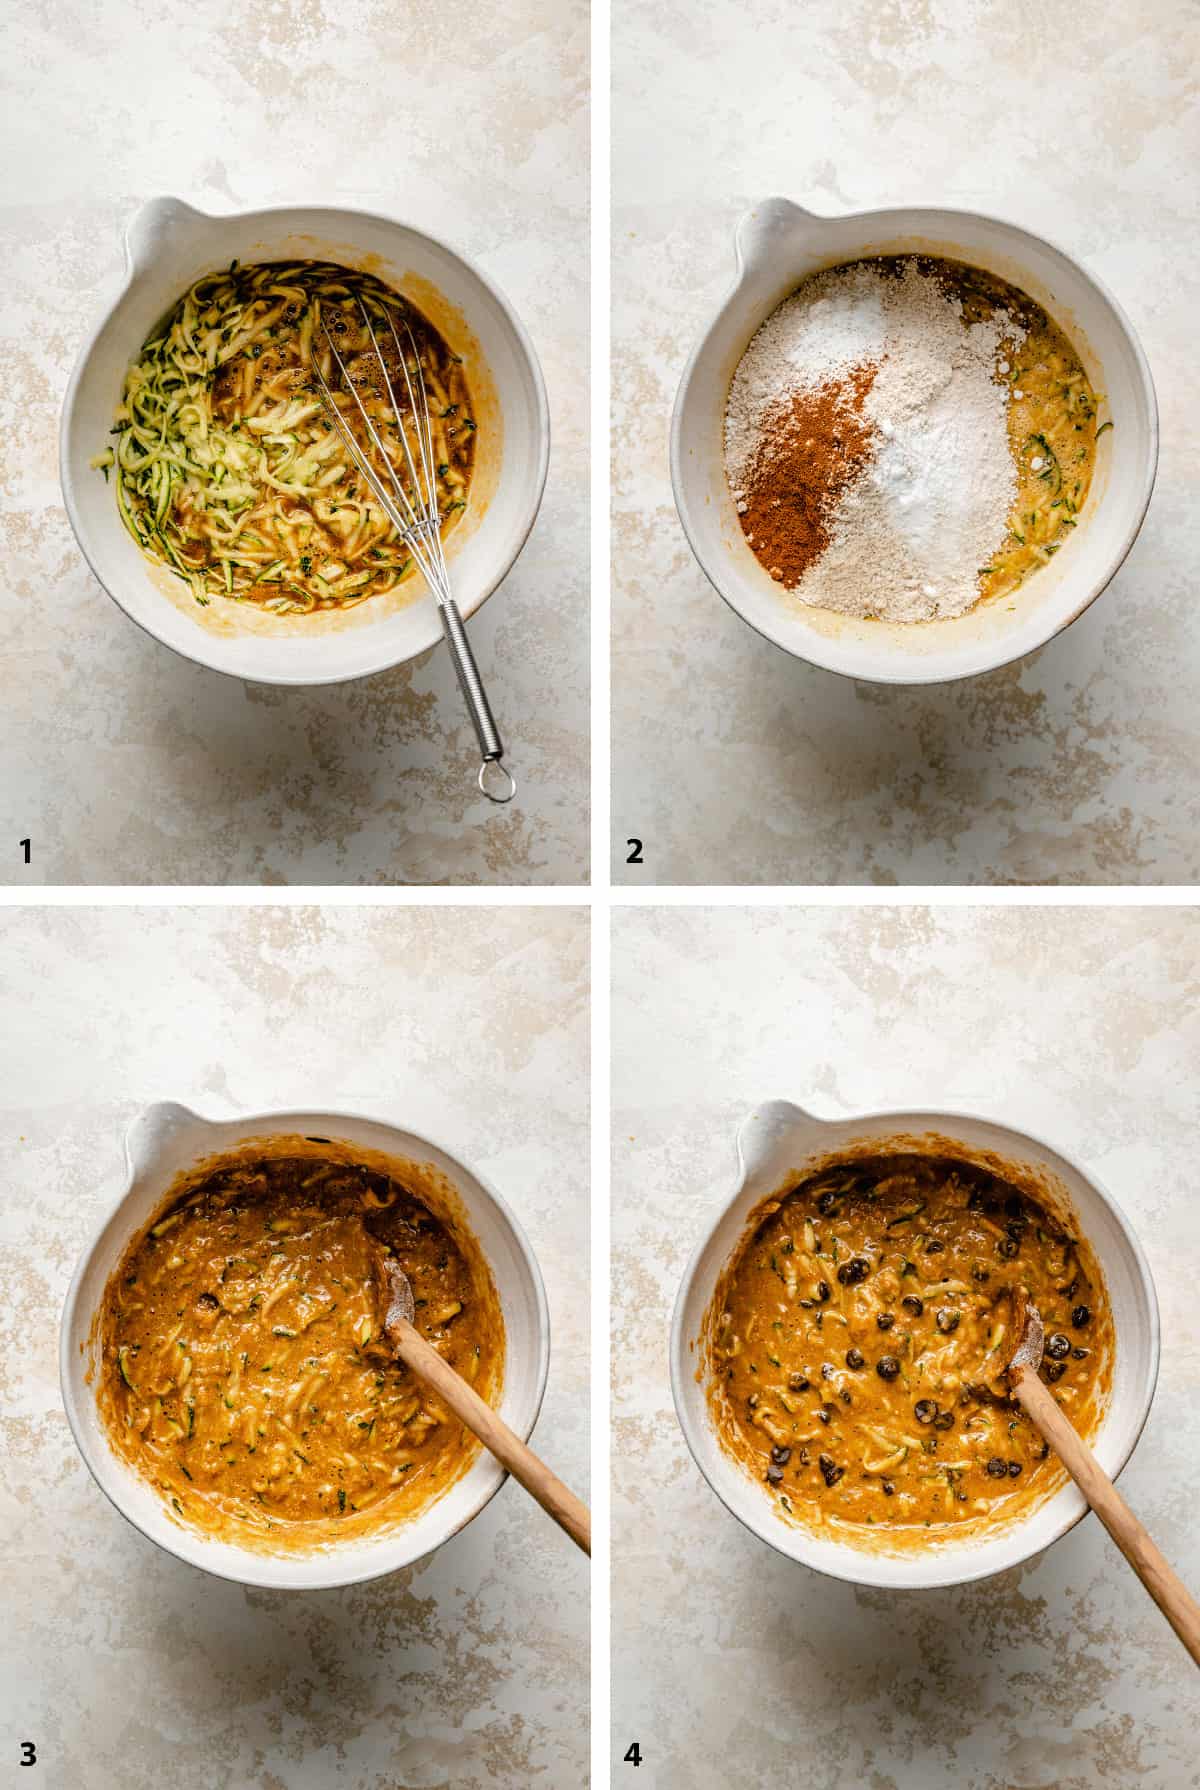 Process of creating the zucchini bread batter in a bowl with a wooden spoon.